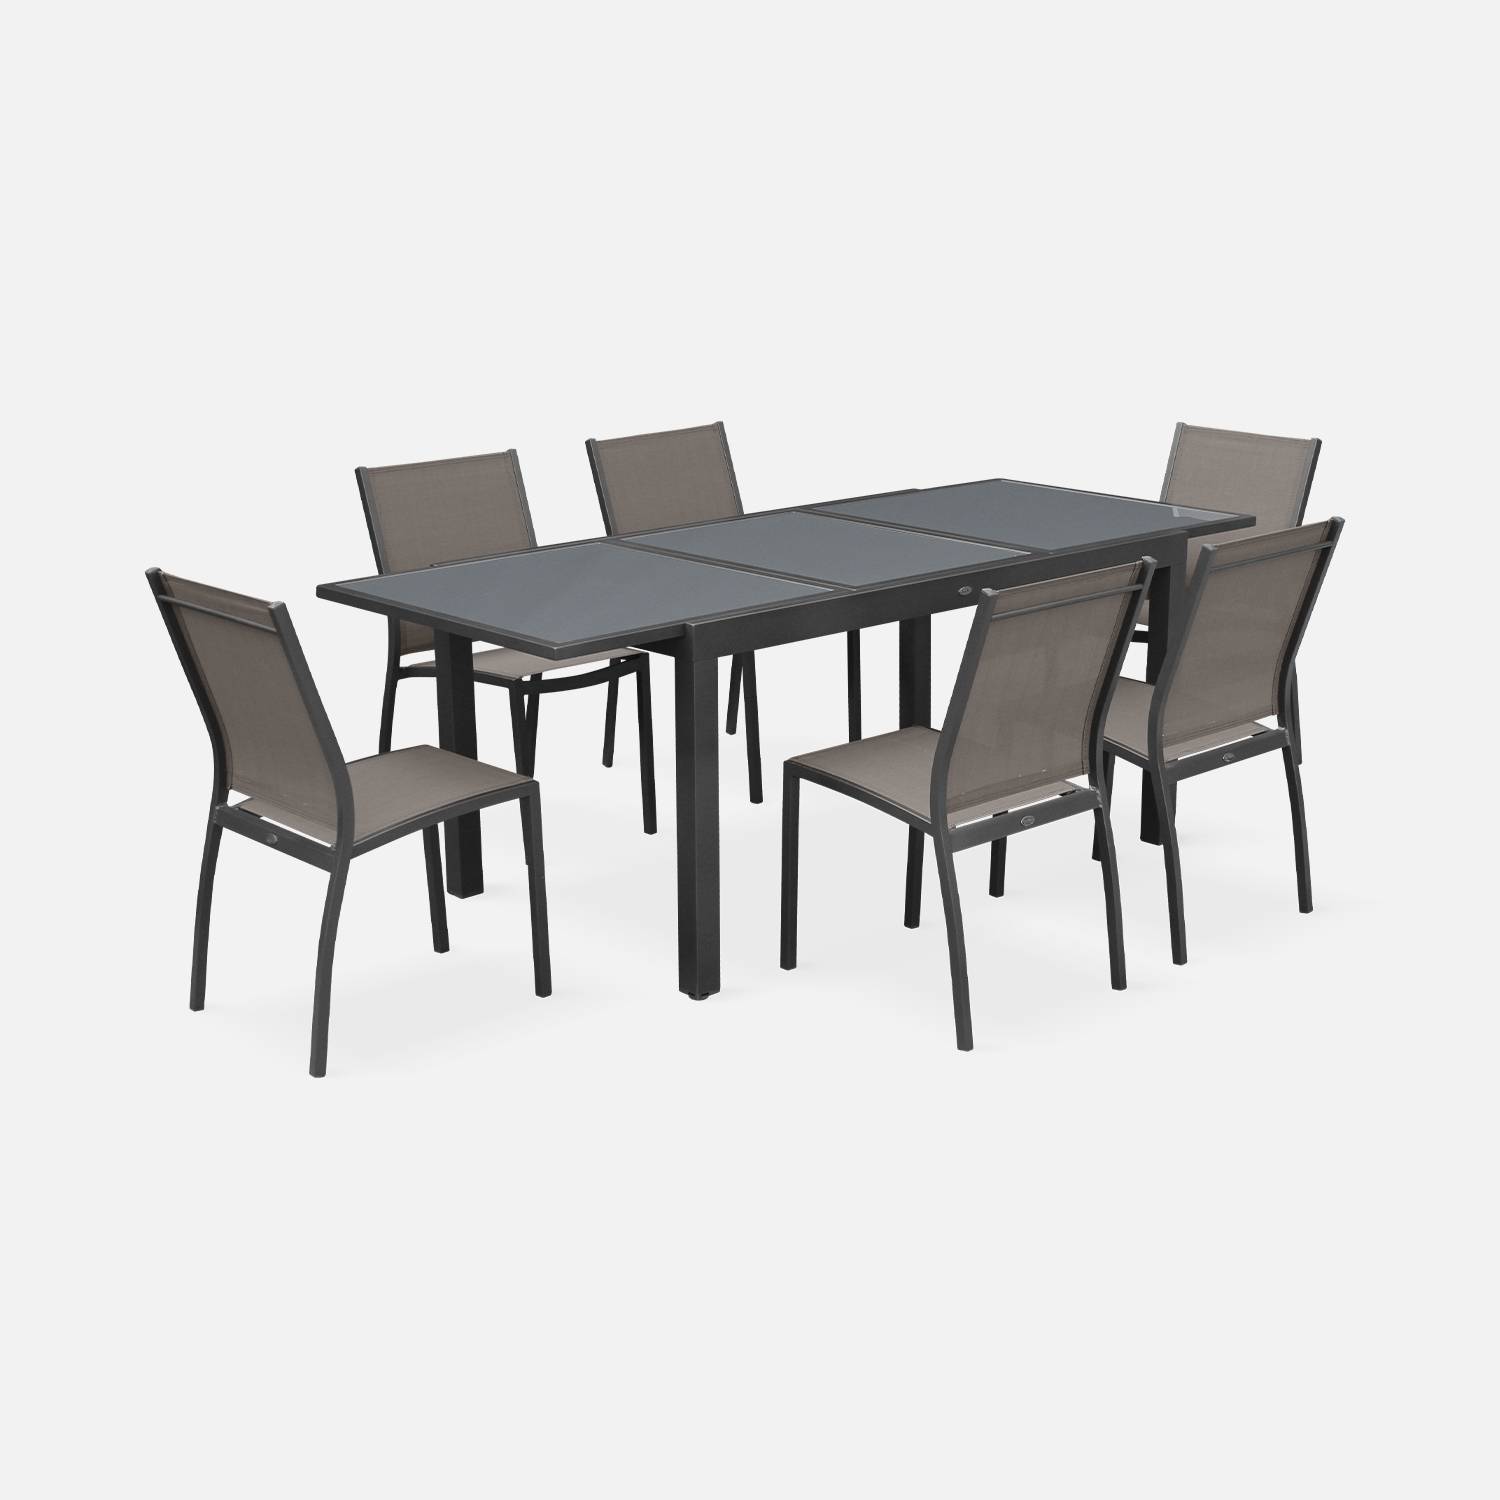 6 seater extendable table and chairs set in alumimium and textilene, Grey / Beige-Brown | sweeek